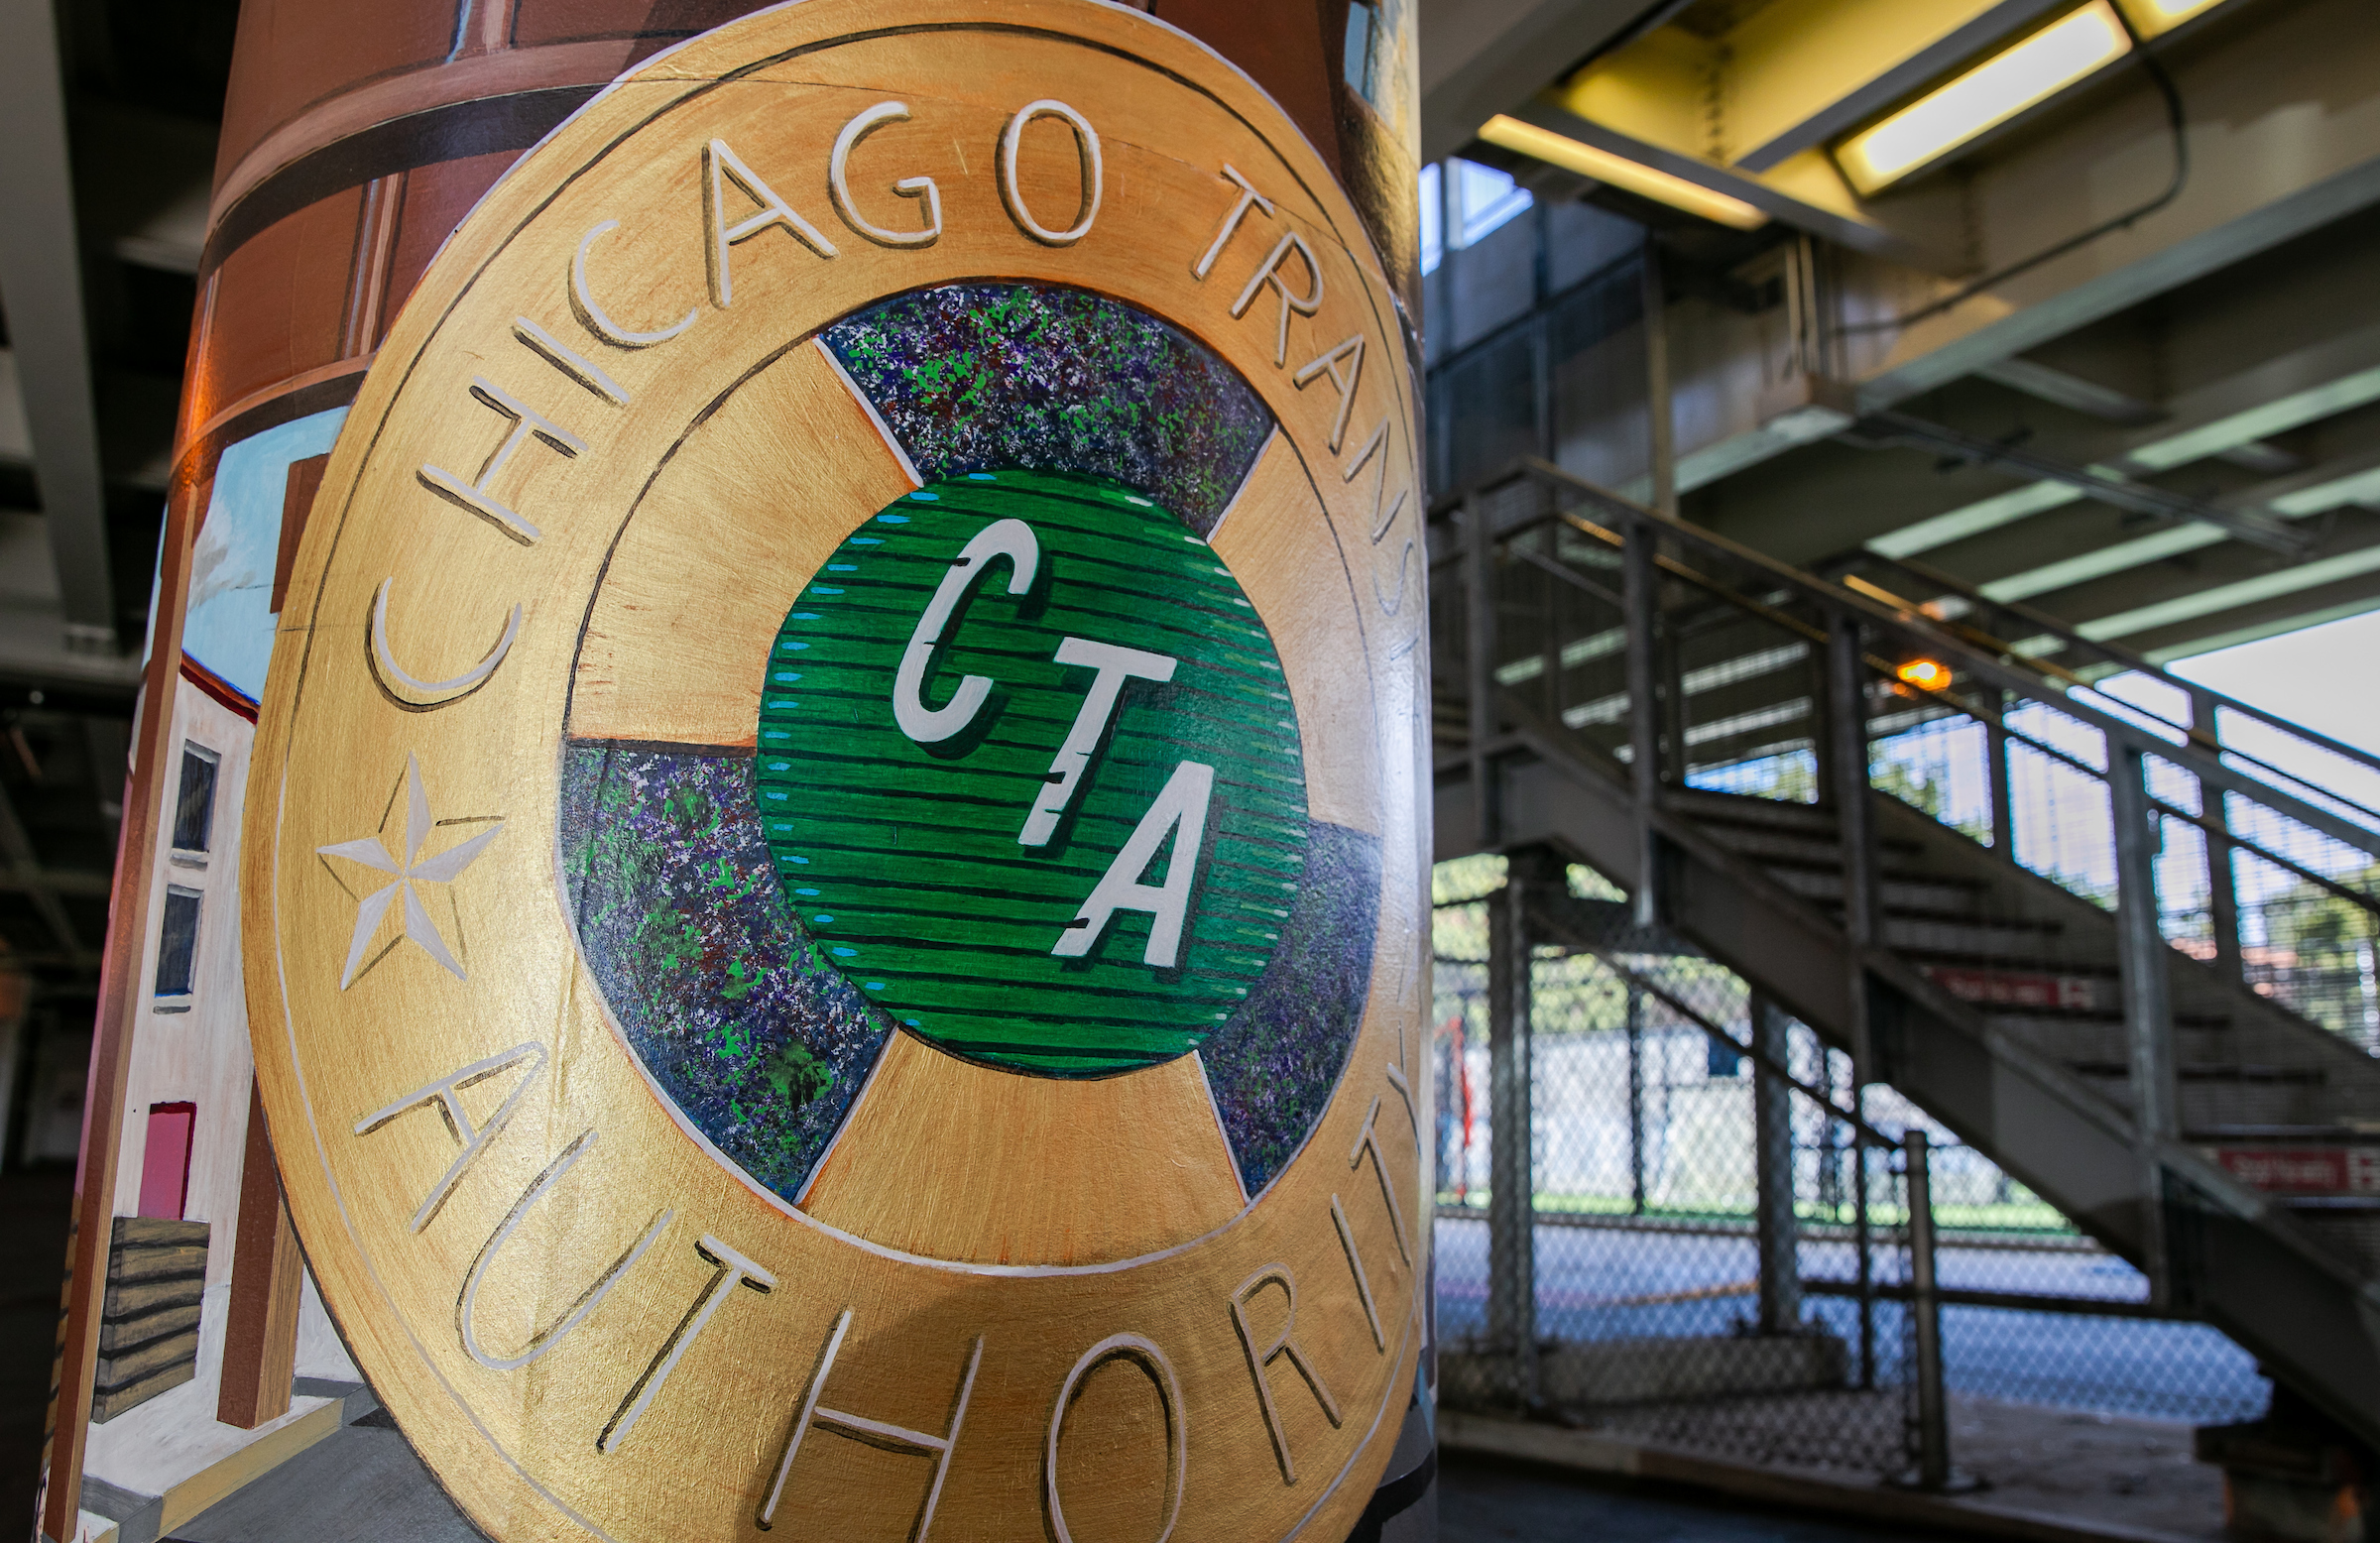 A painted pillar sports a mural with the Chicago Transit Authority logo